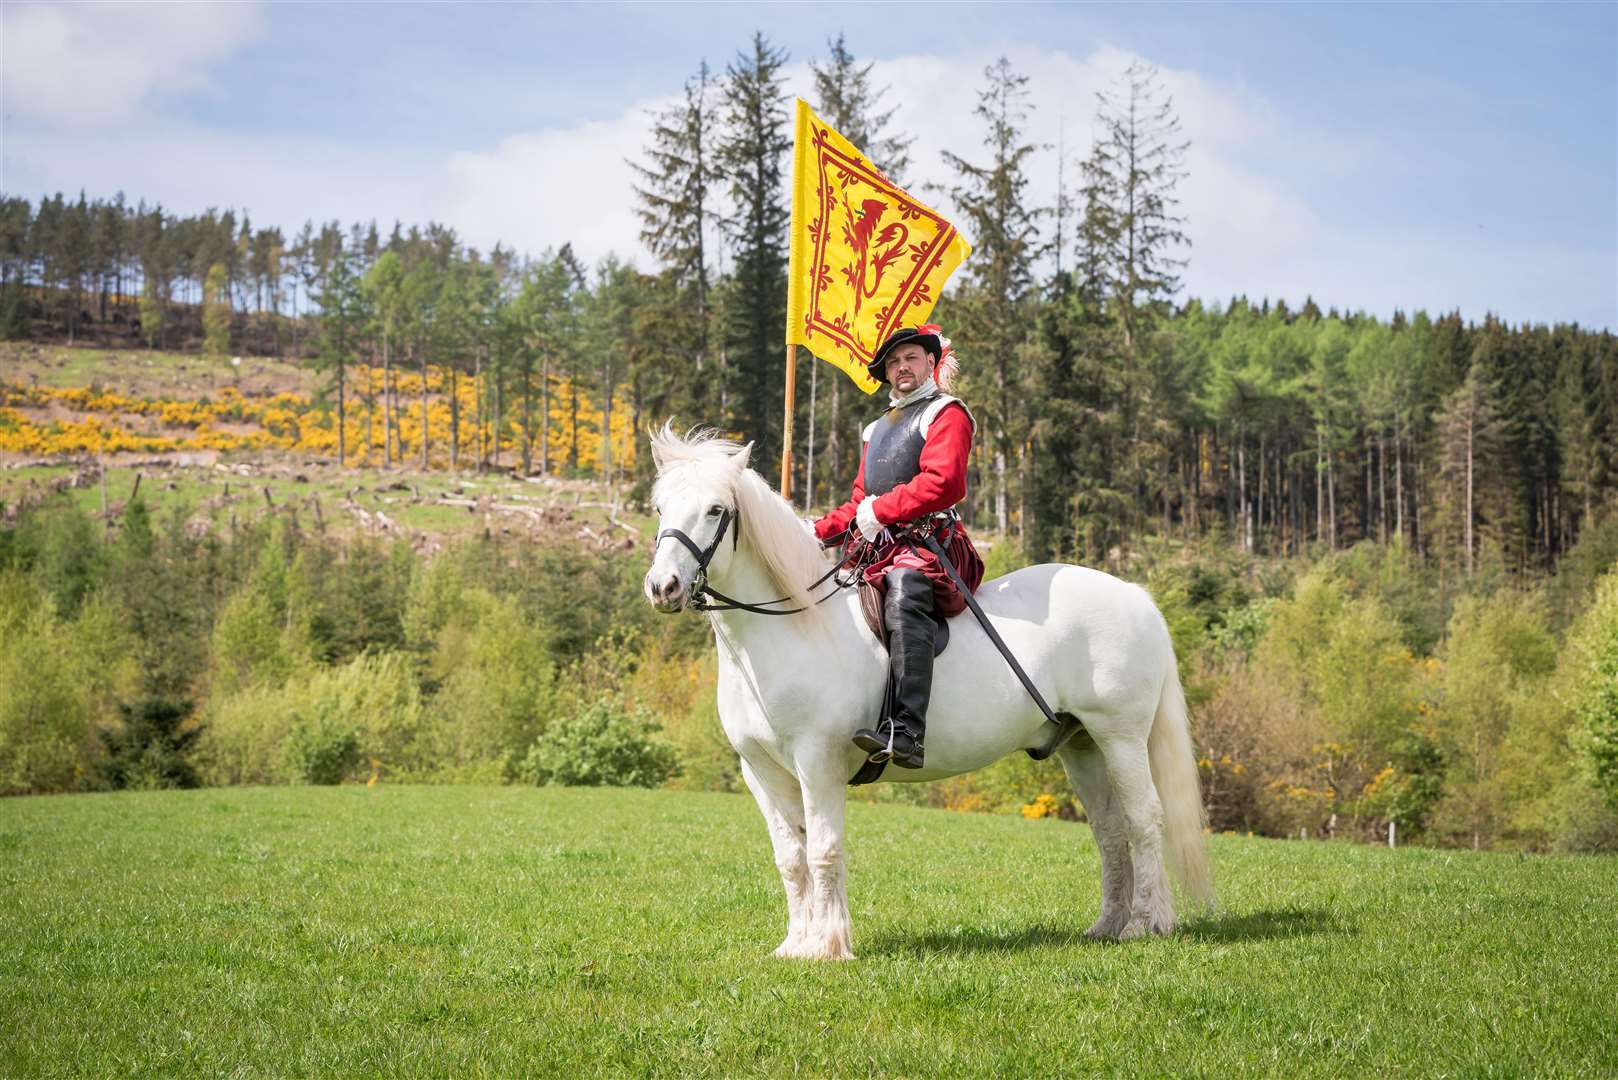 Dr Arran Johnston, historian and professional battle re-enactor, as the Earl of Moray, ready to resurrect the Battle of Corrichie at Banchory, Aberdeenshire, this summer.